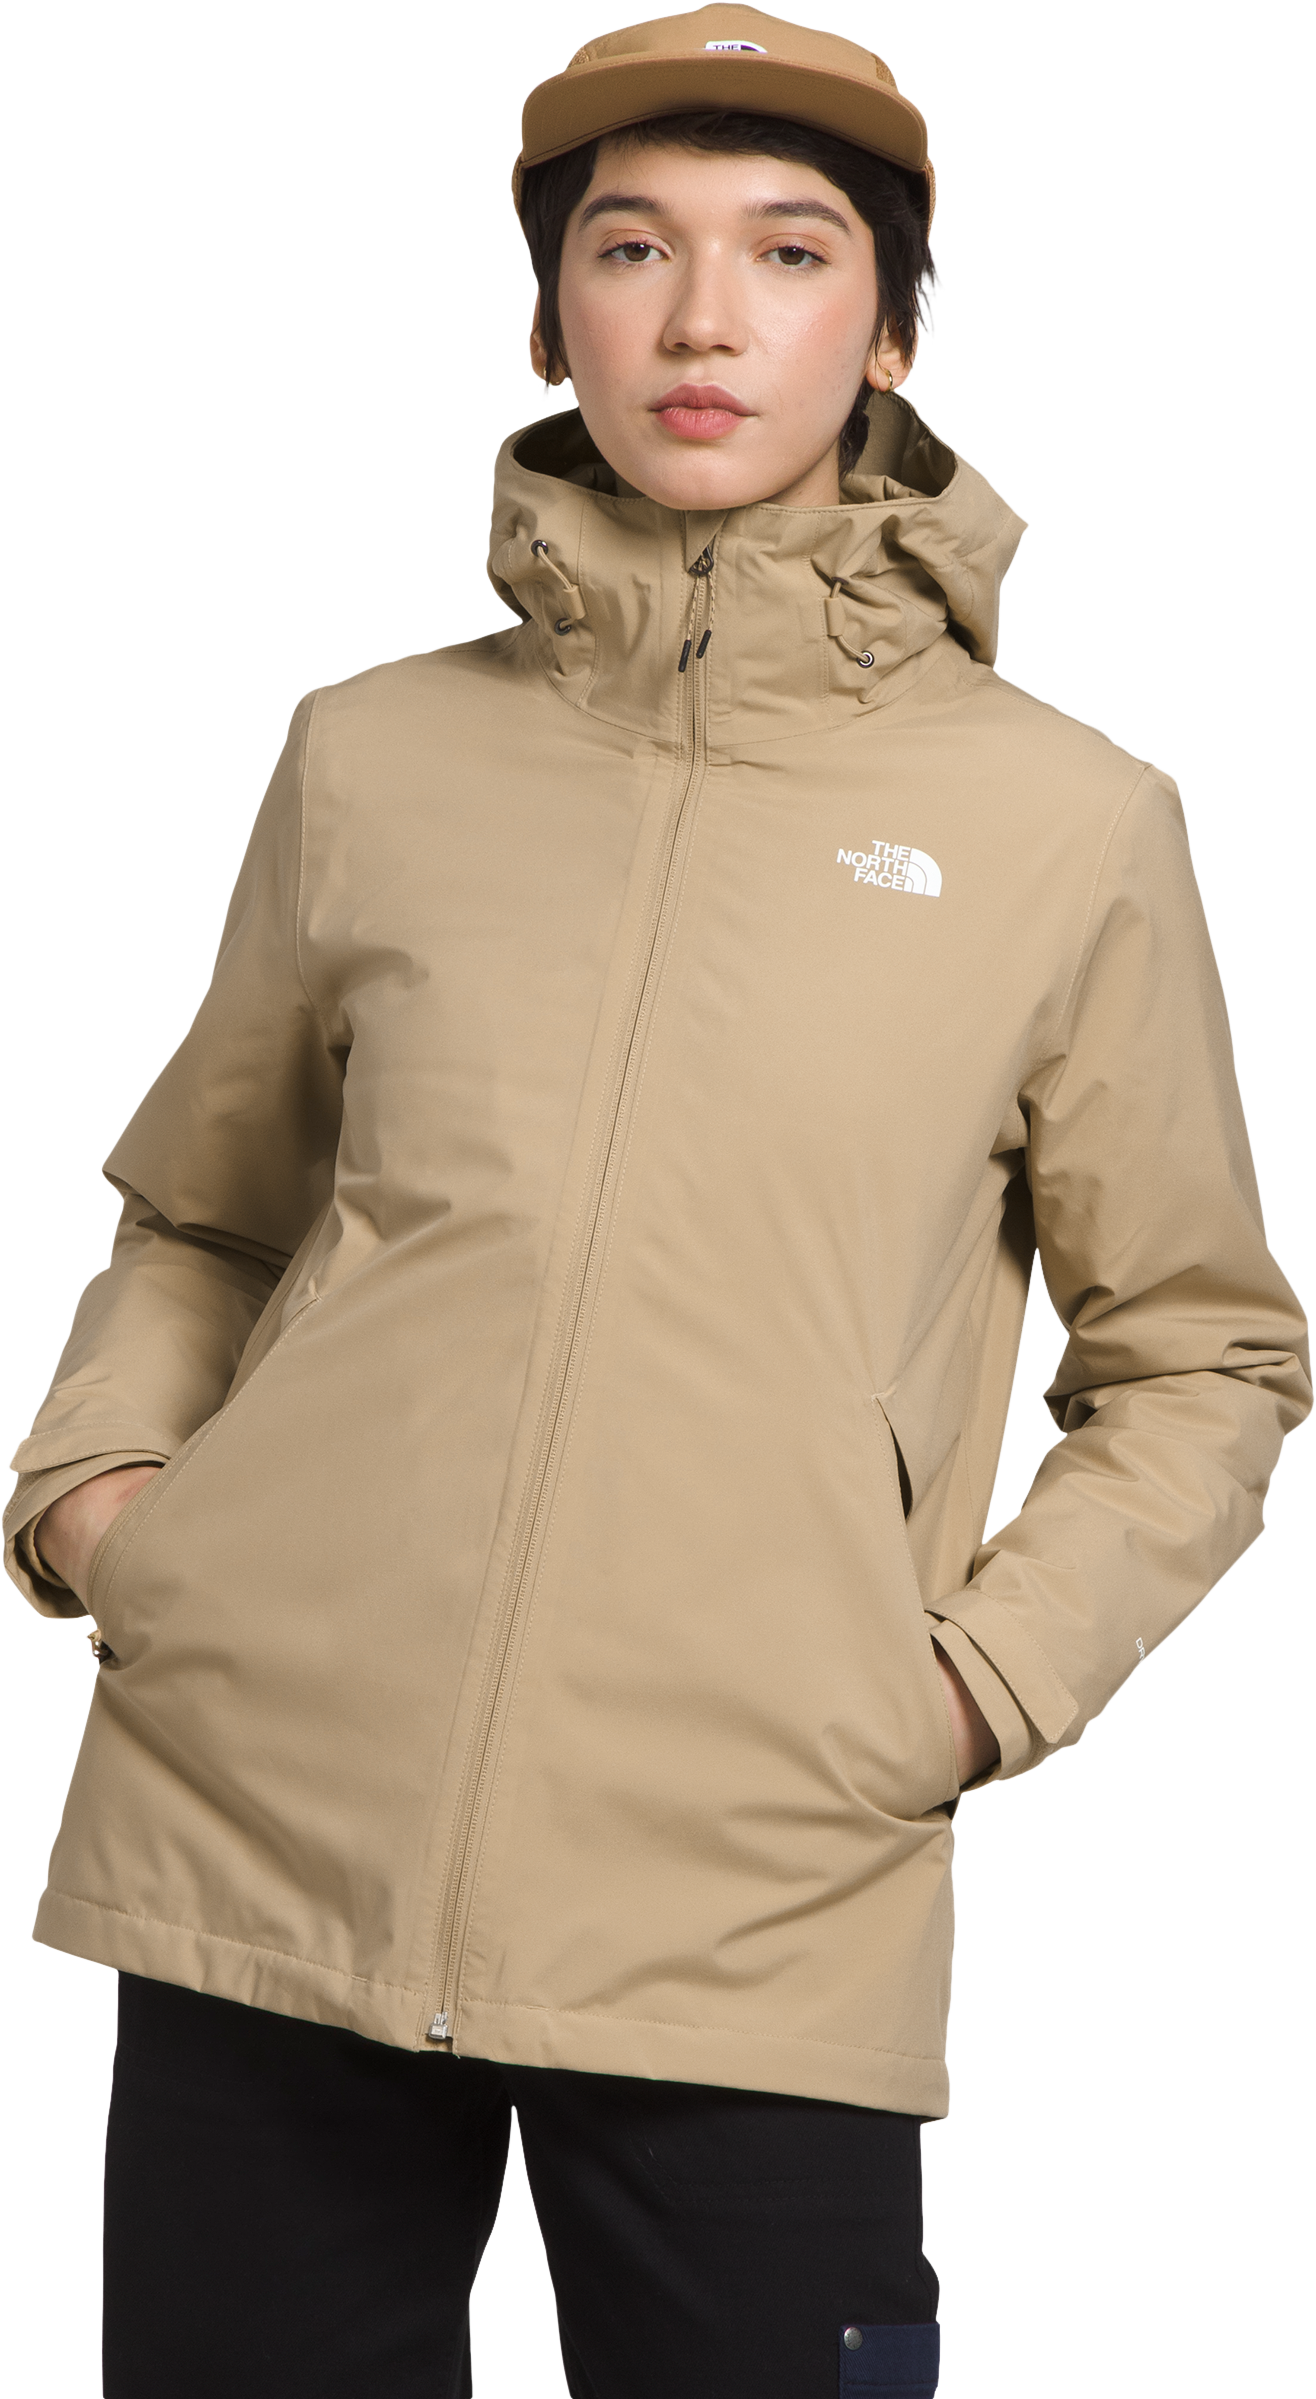 The North Face Carto Triclimate 3-in-1 Jacket for Ladies - Khaki Stone - XL